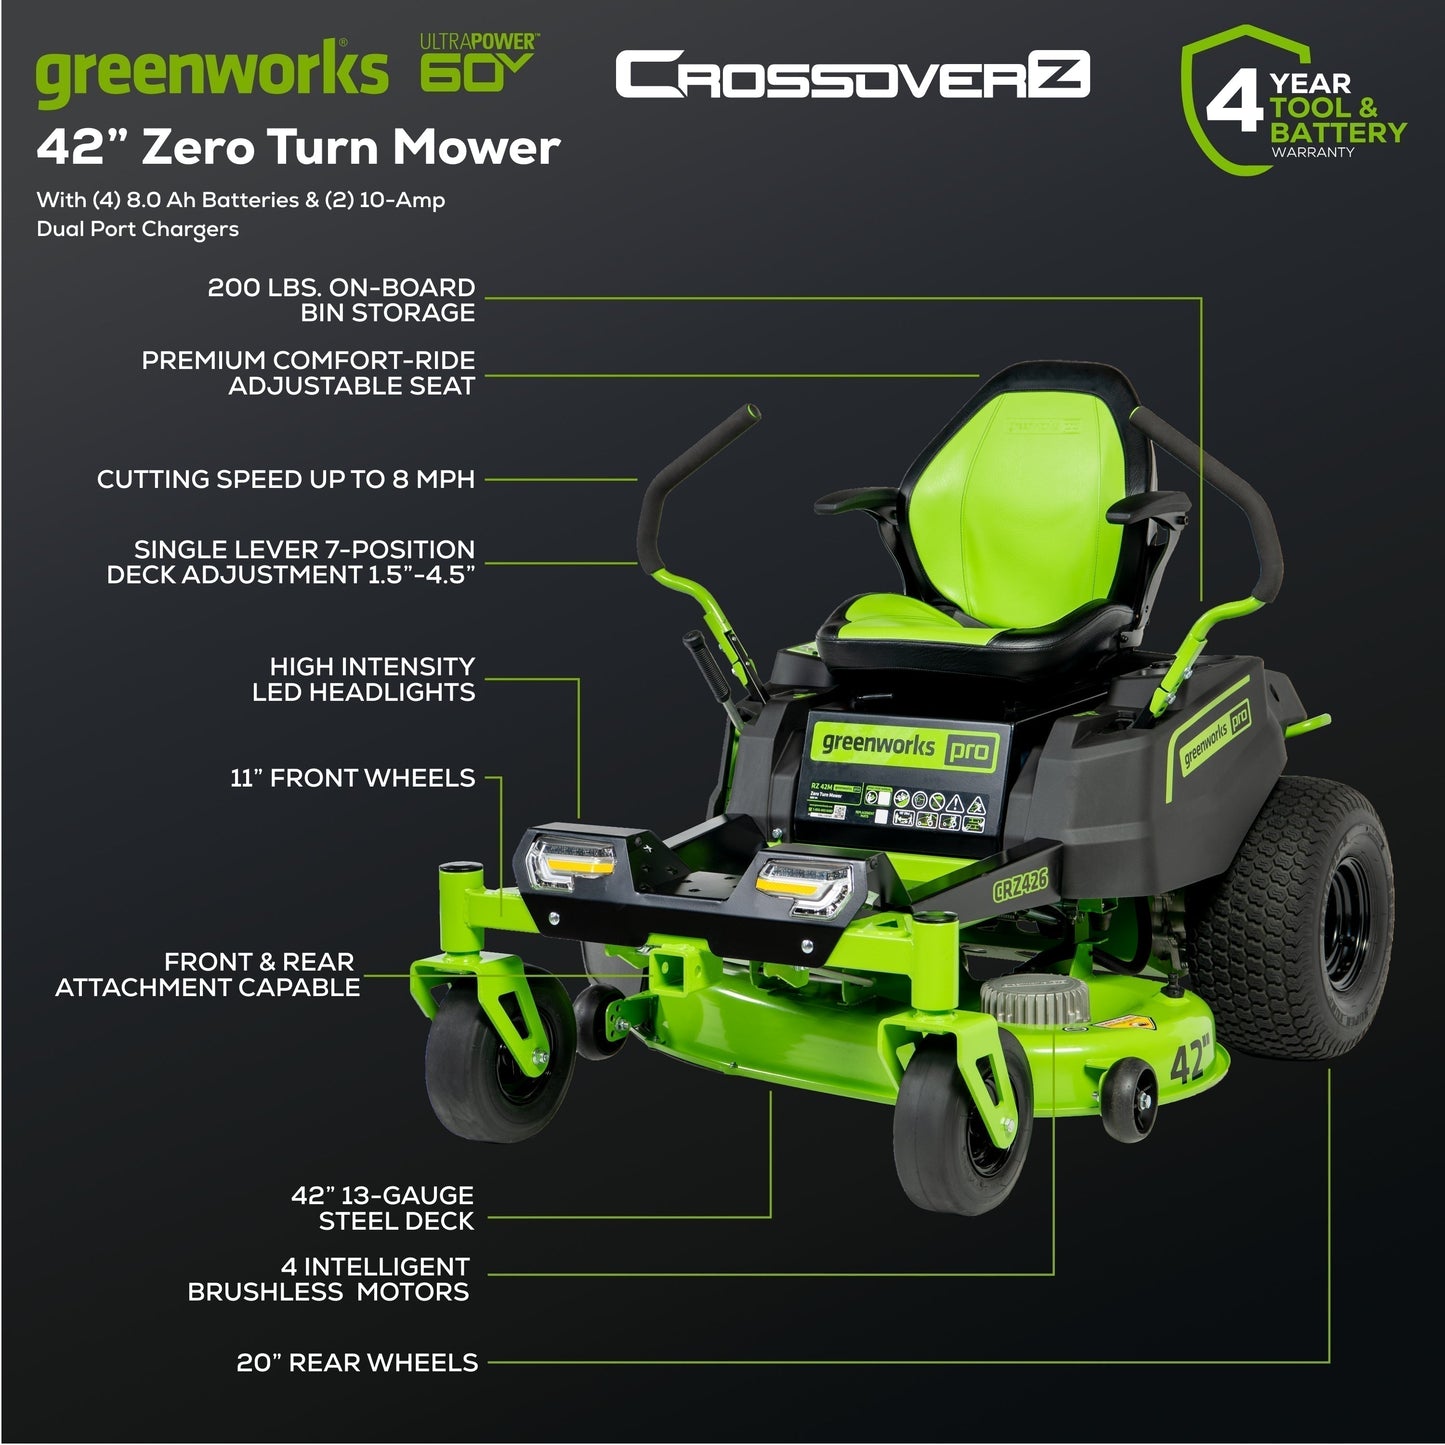 60V 42” Electric CrossoverZ Zero Turn Mower with (4) 8 Ah Batteries and (2) Dual Port Turbo Chargers - ZEROTURNN